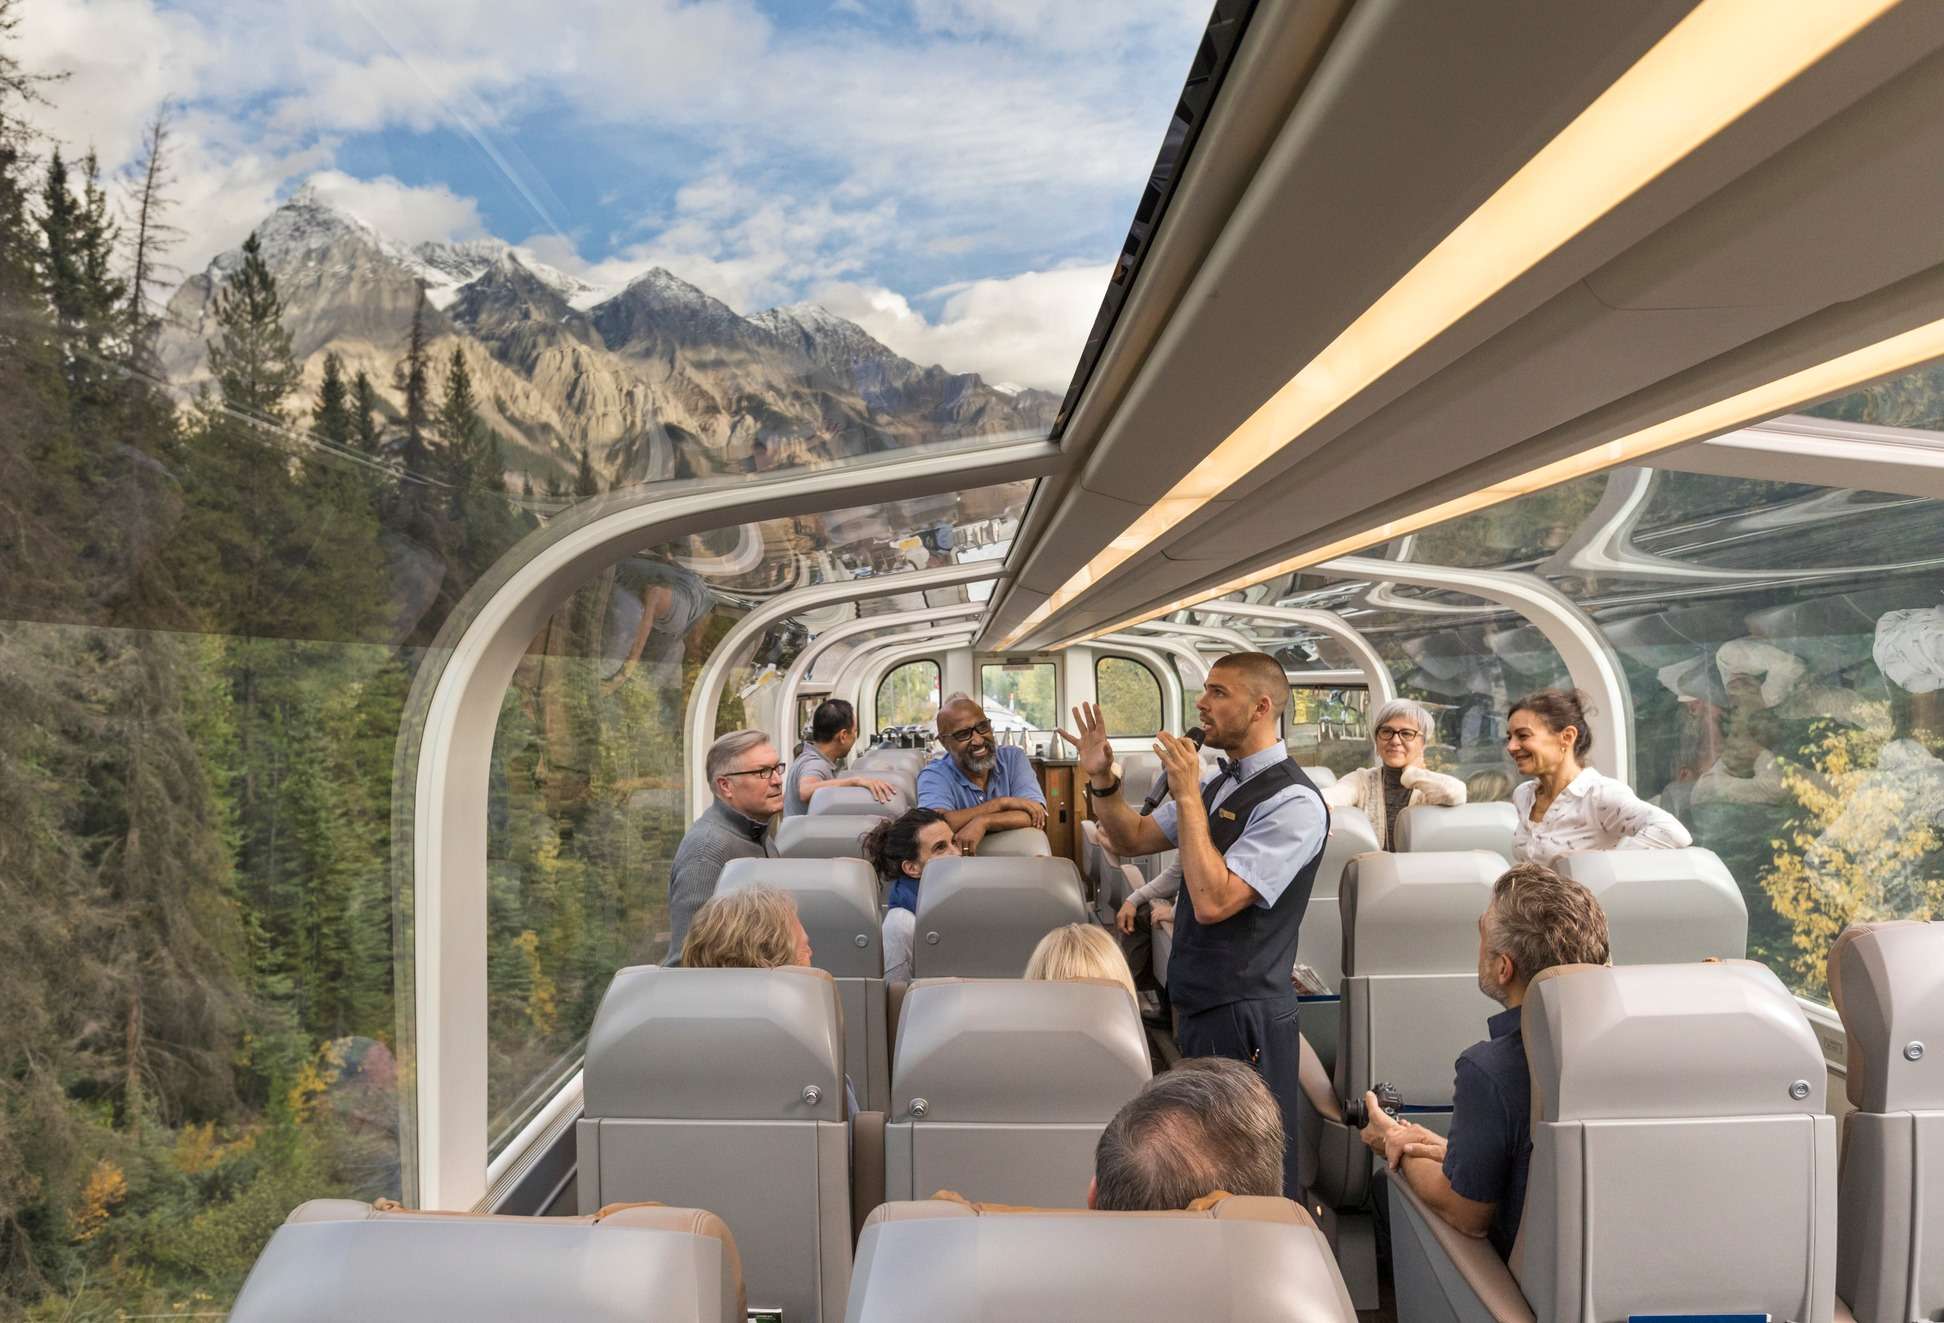 Top 5 Most Luxurious Trains Around the World Don’t miss the 2nd one